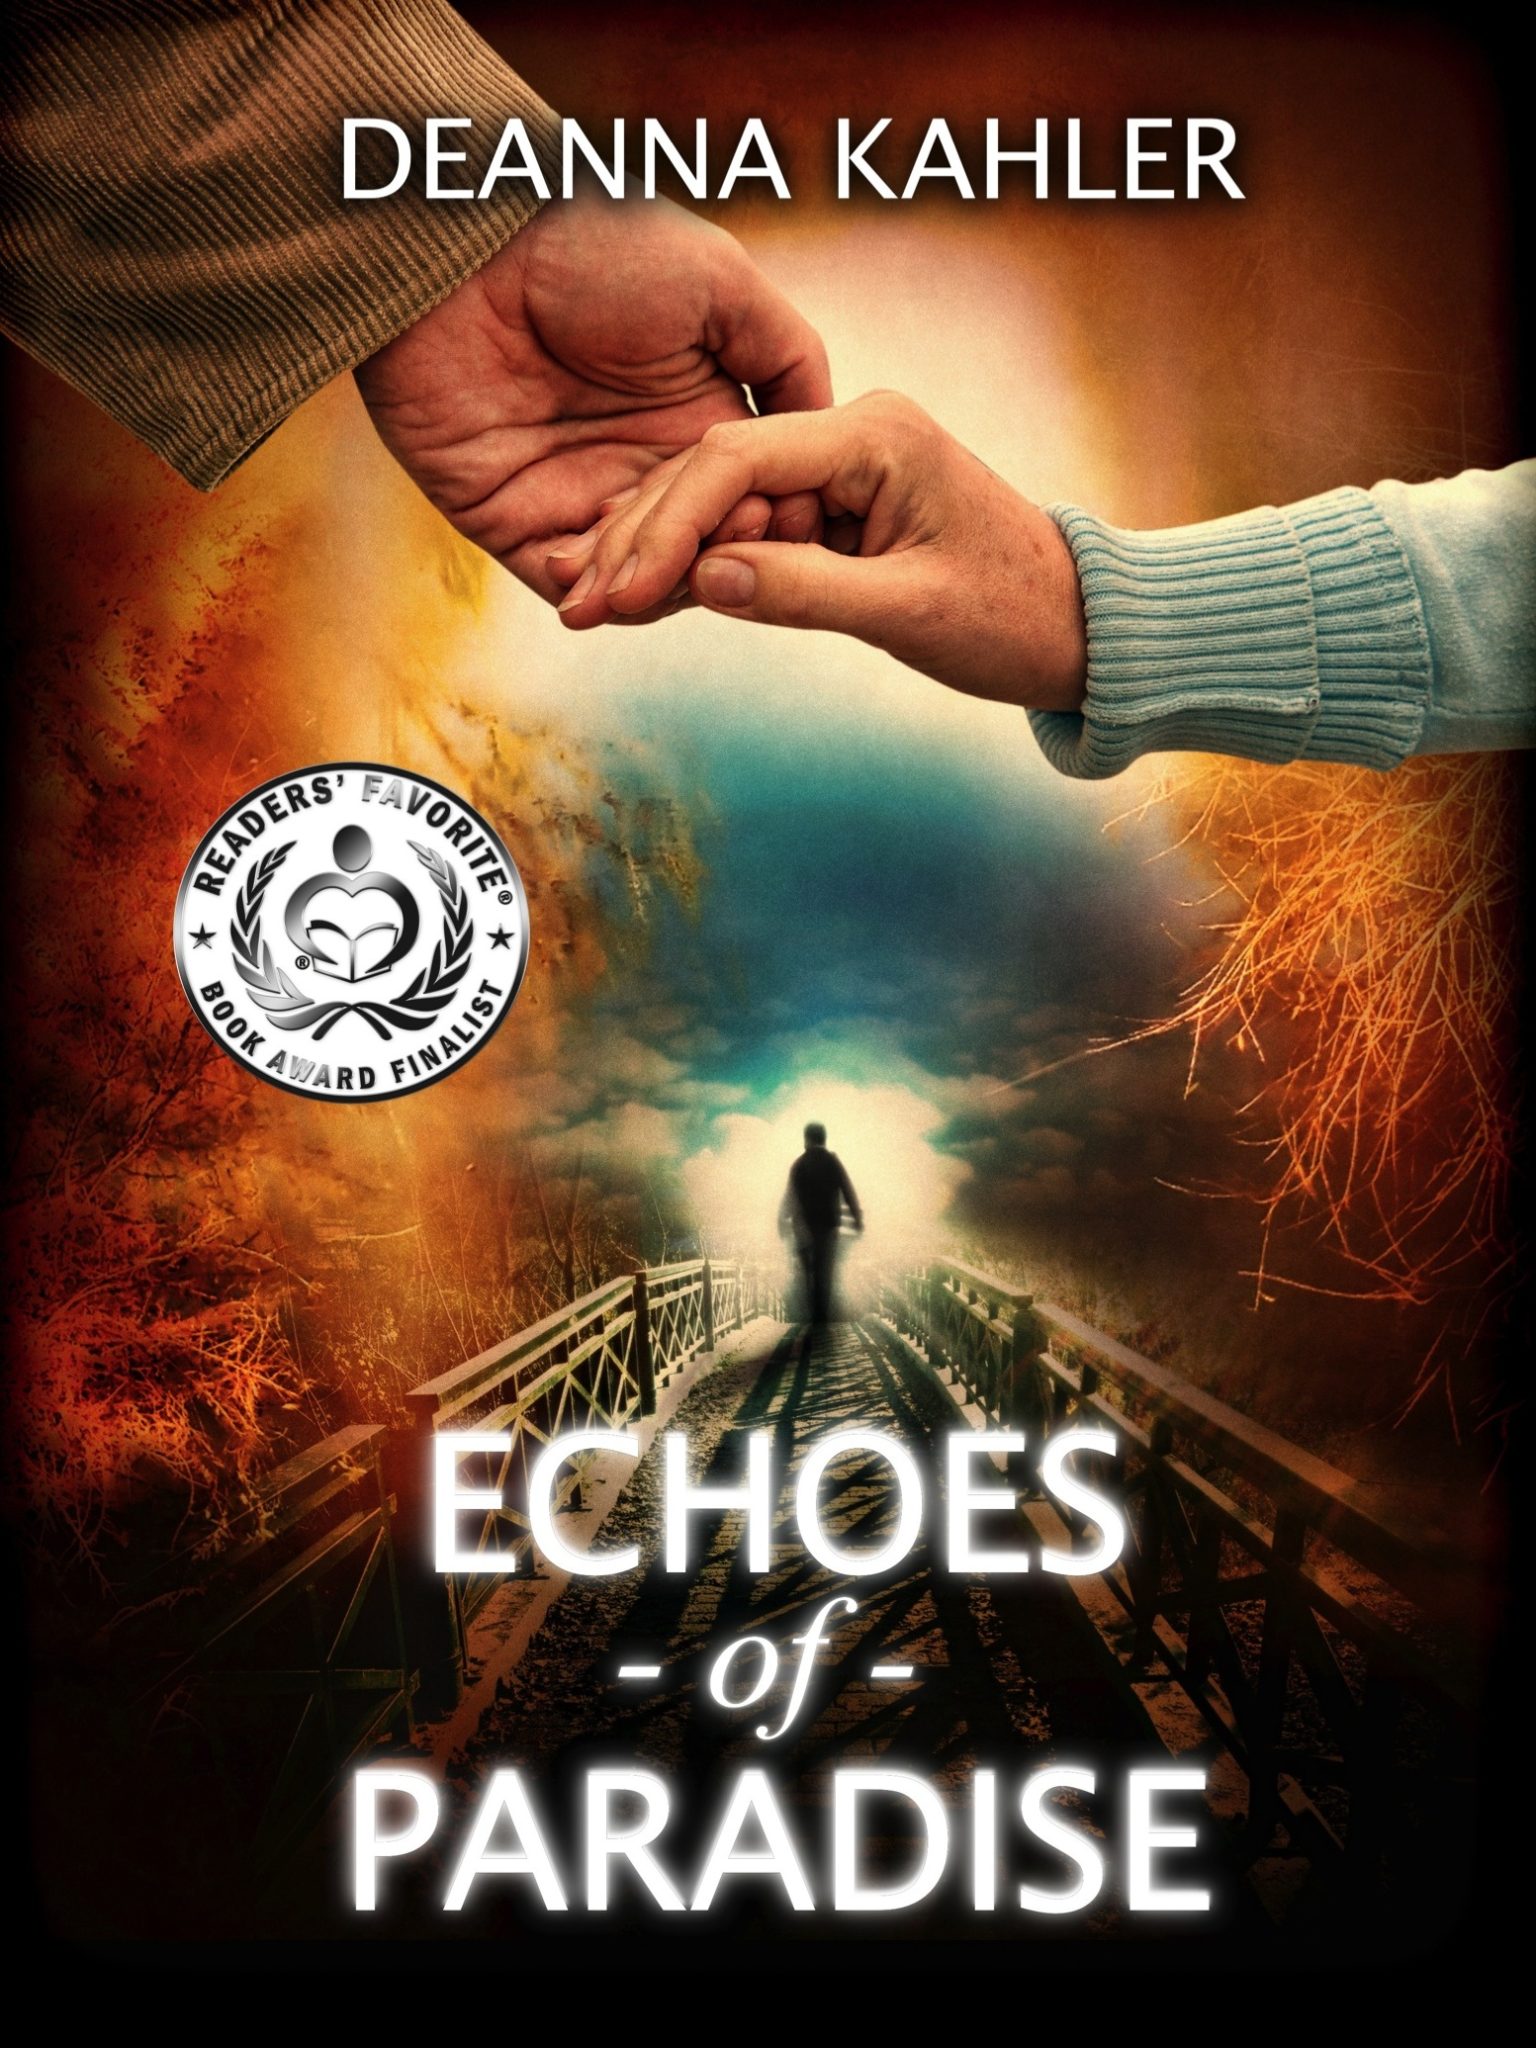 FREE: Echoes of Paradise by Deanna Kahelr